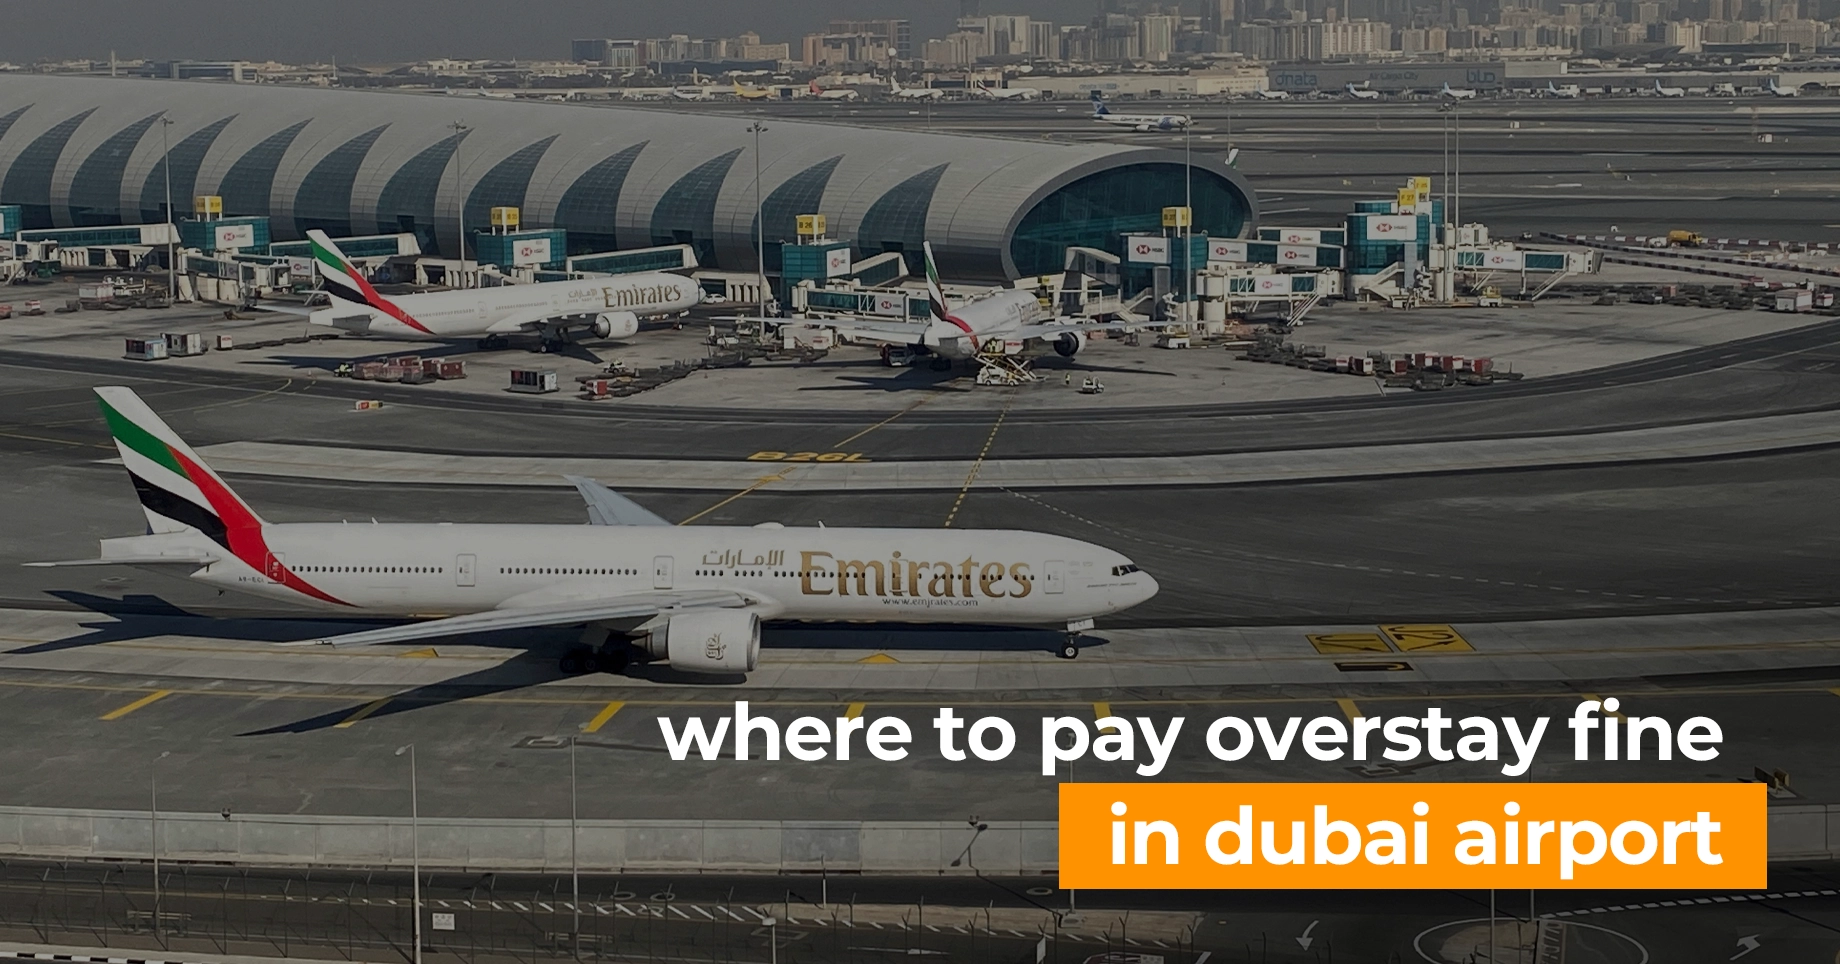 Where to Pay Overstay Fine in Dubai Airport